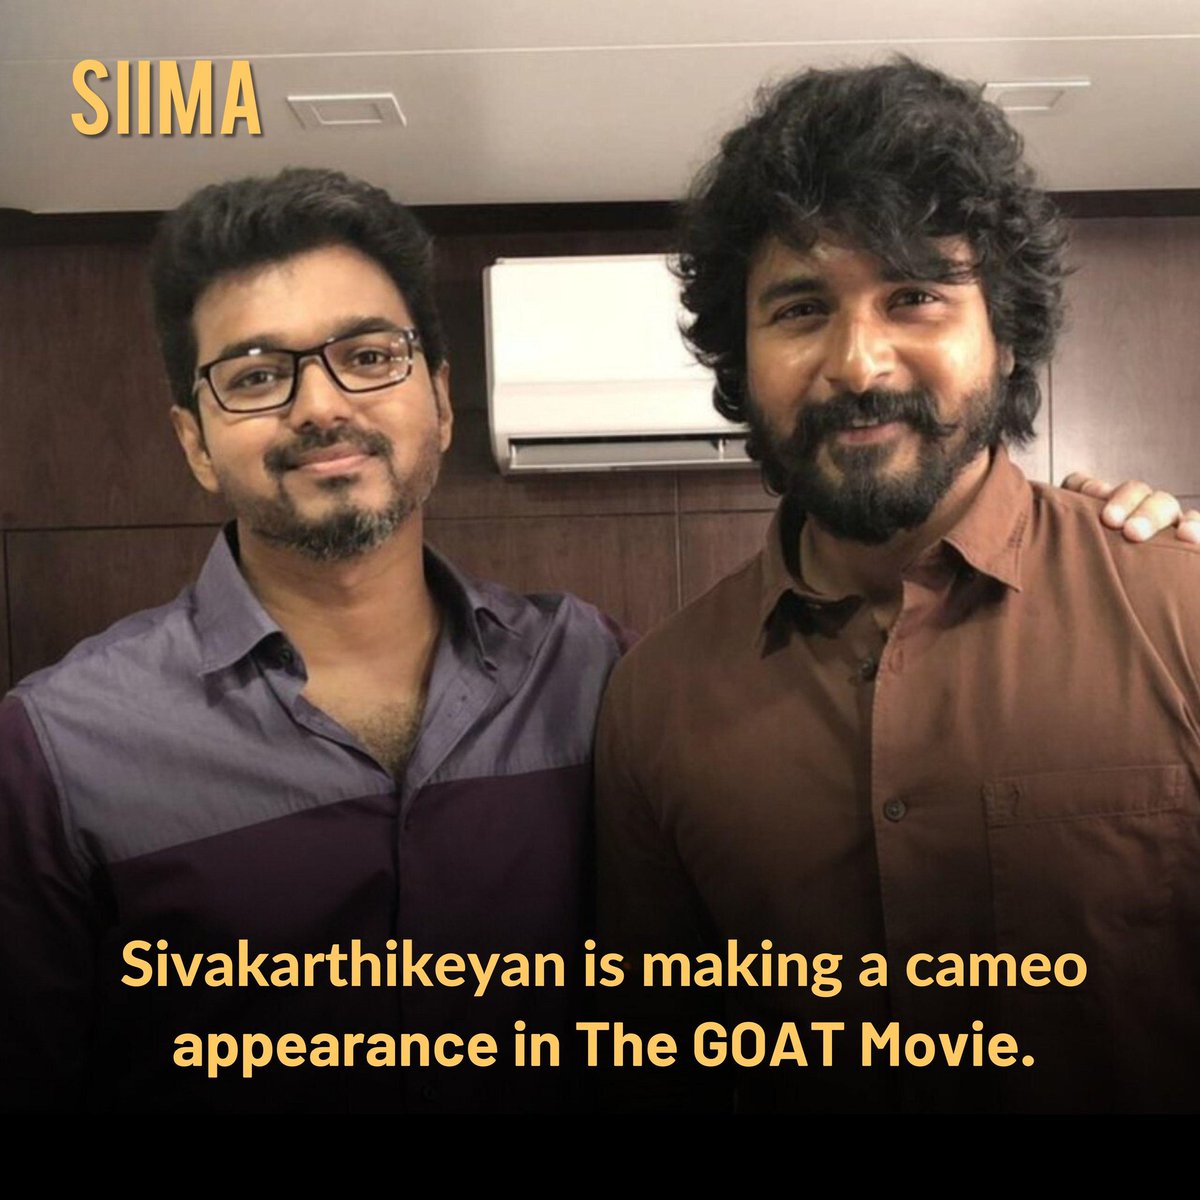 Keep your eyes peeled for a surprise cameo by none other than Sivakarthikeyan in The GOAT Movie! 🎬 

@actorvijay @Siva_Kartikeyan

#Sivakarthikeyan #TheGOATMovie #SIIMA #CameoAppearance #StayTuned